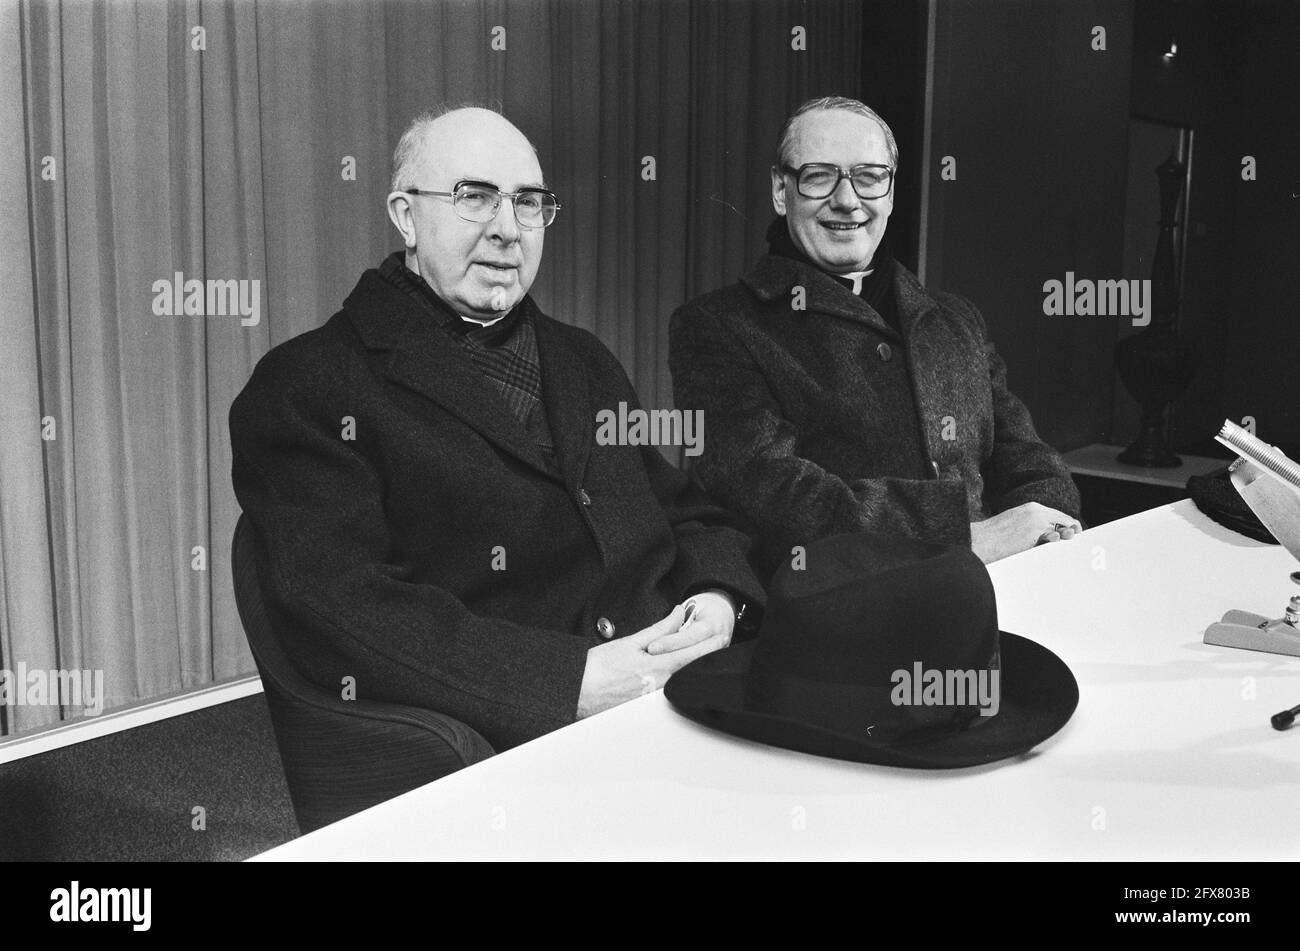 Arrival at Schiphol from Rome; Cardinal Willebrands and Bishop Simonis; Cardinal Willebrands (l) and Bishop Simonis during press conference, January 22, 1979, arrivals, cardinals, press conferences, The Netherlands, 20th century press agency photo, news to remember, documentary, historic photography 1945-1990, visual stories, human history of the Twentieth Century, capturing moments in time Stock Photo